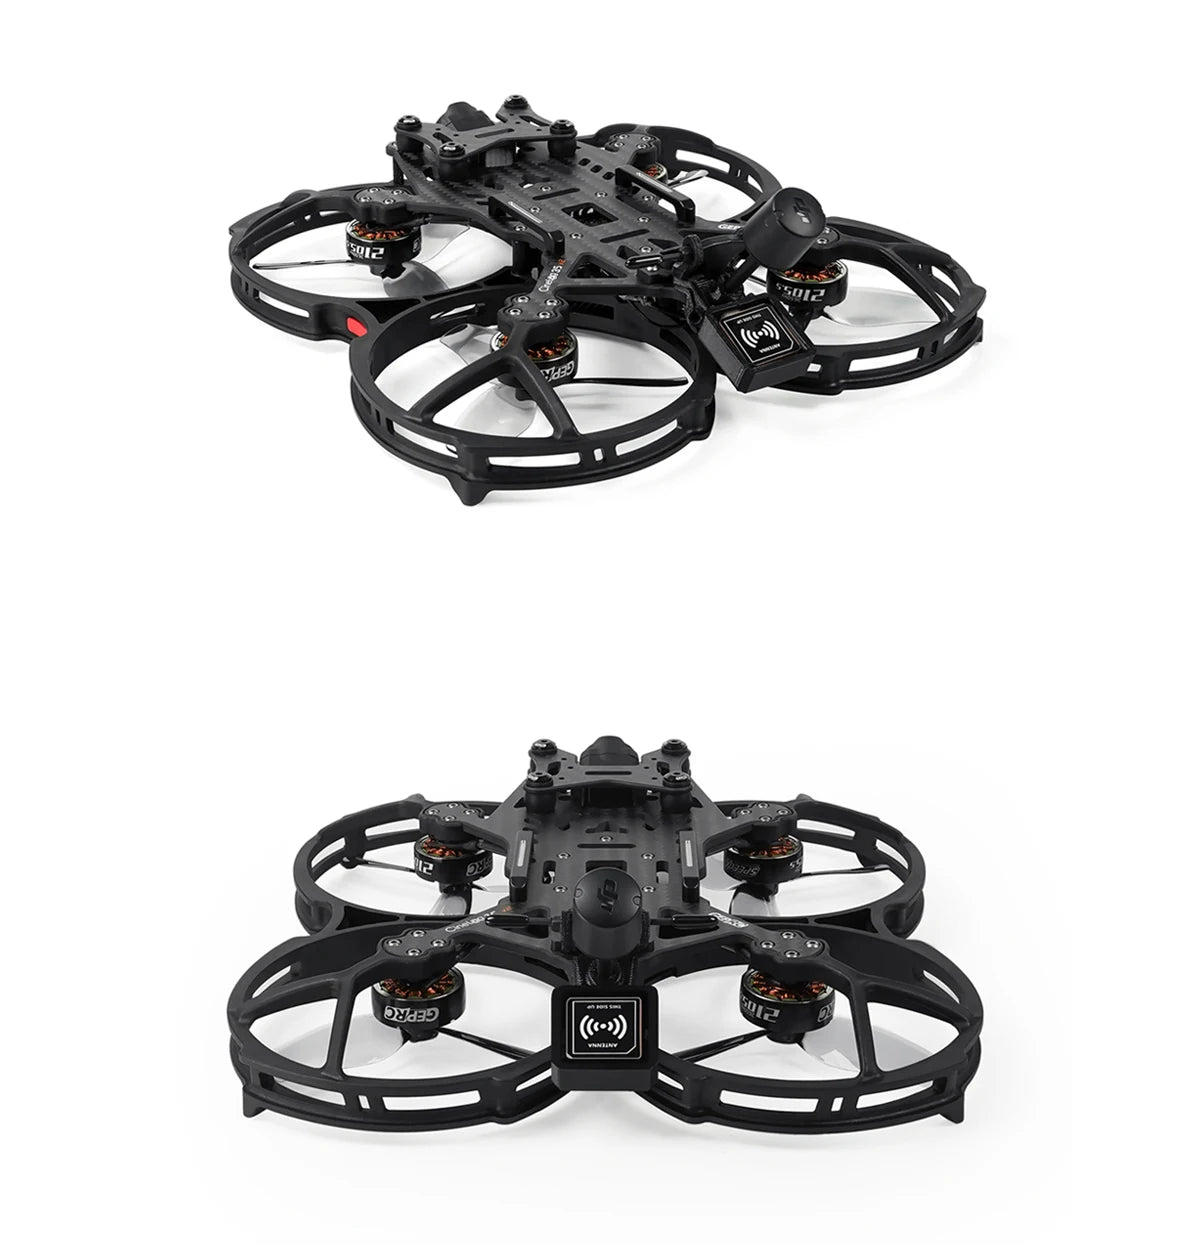 GEPRC Cinelog35 V2 Analog FPV Drone, the user's satisfied voice is the motivation for us to move forward